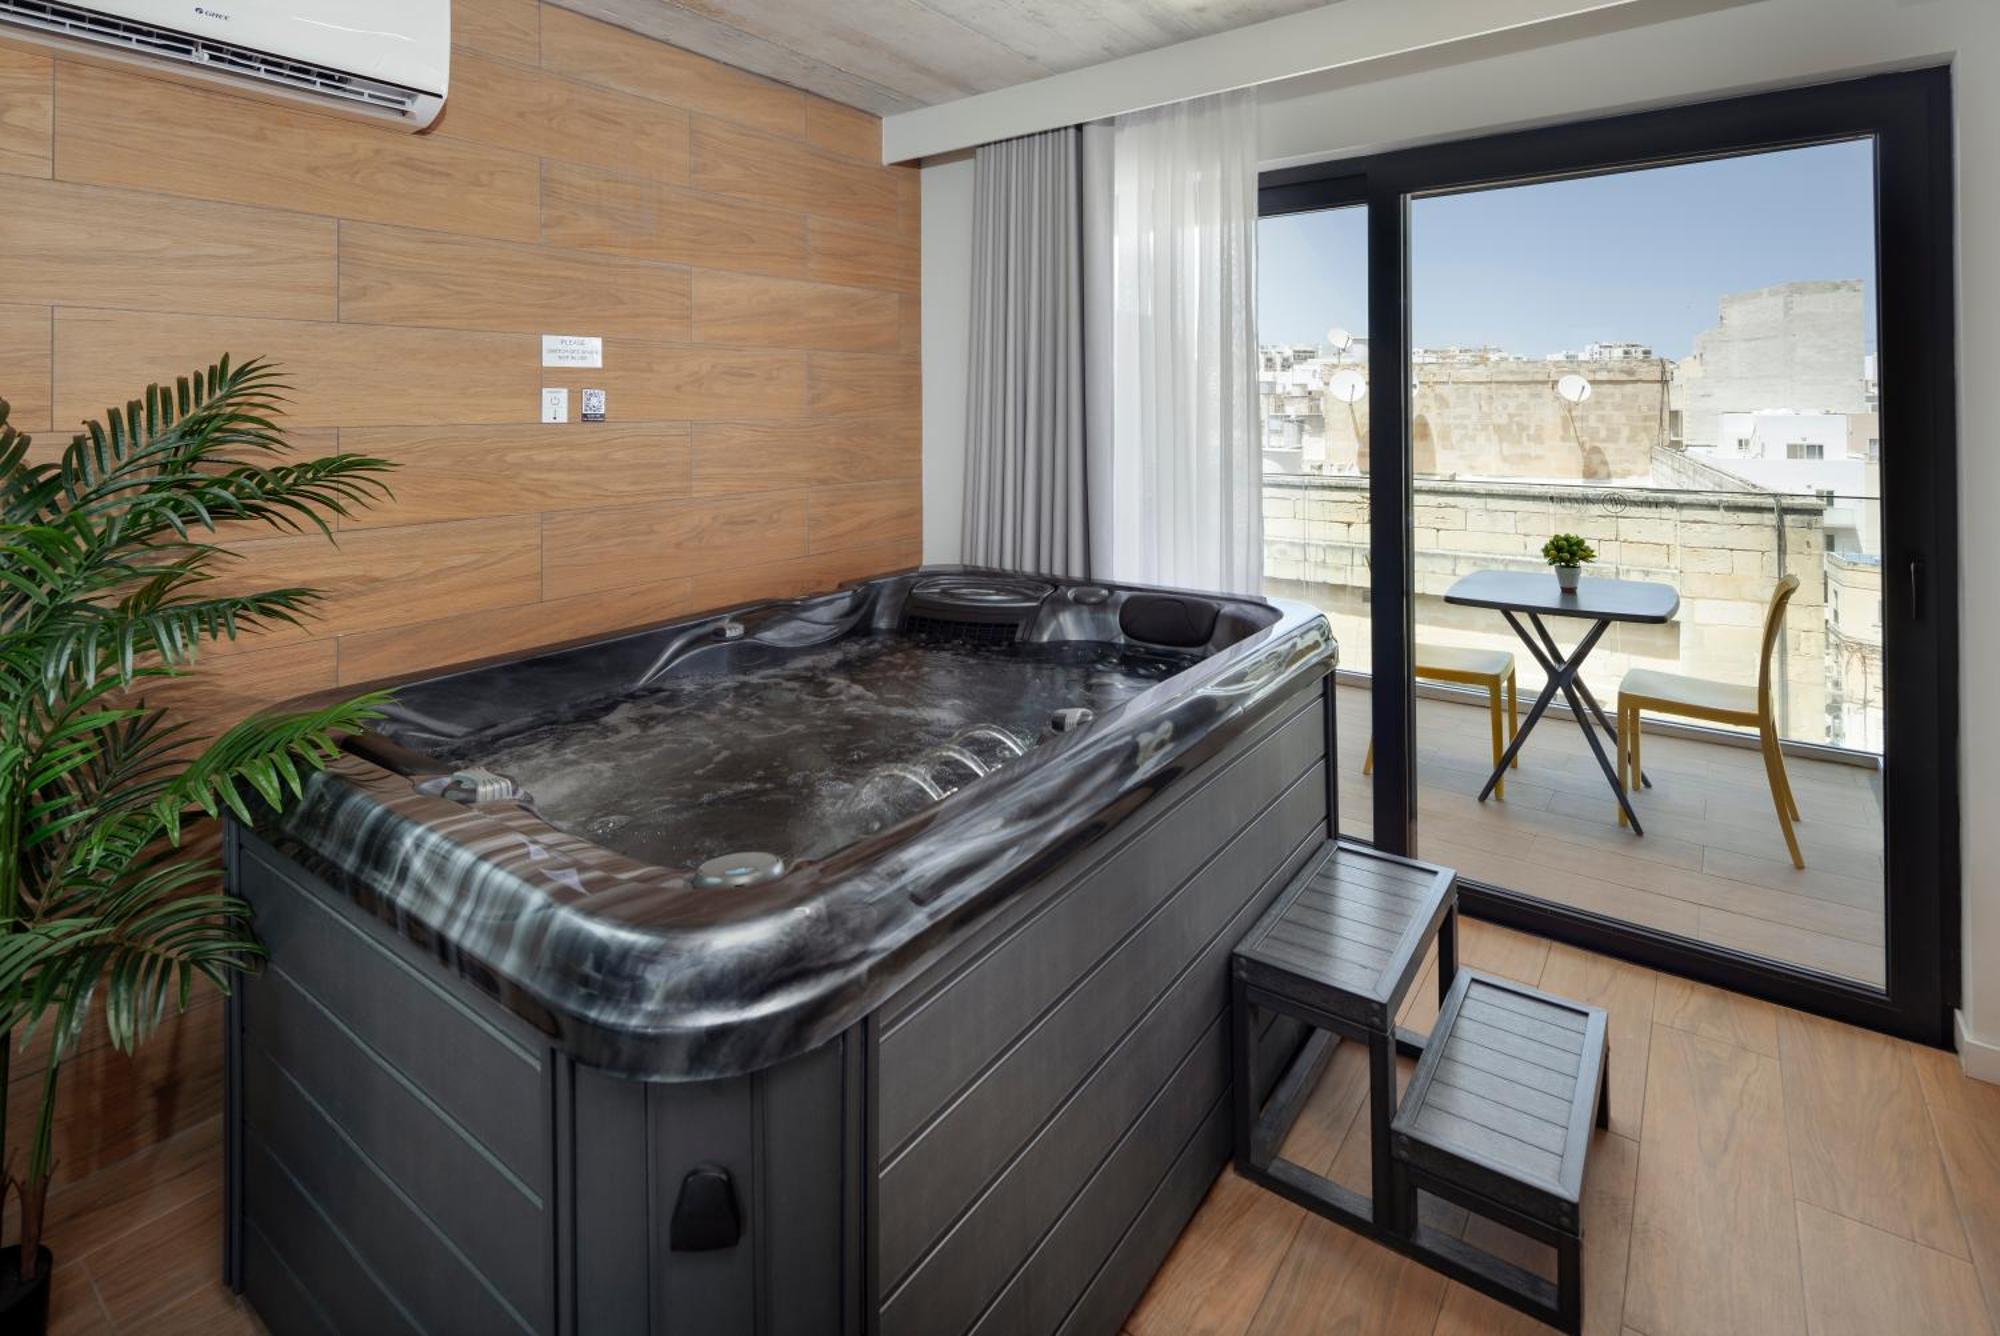 Grands Suites Hotel Residences And Spa Gzira Camera foto